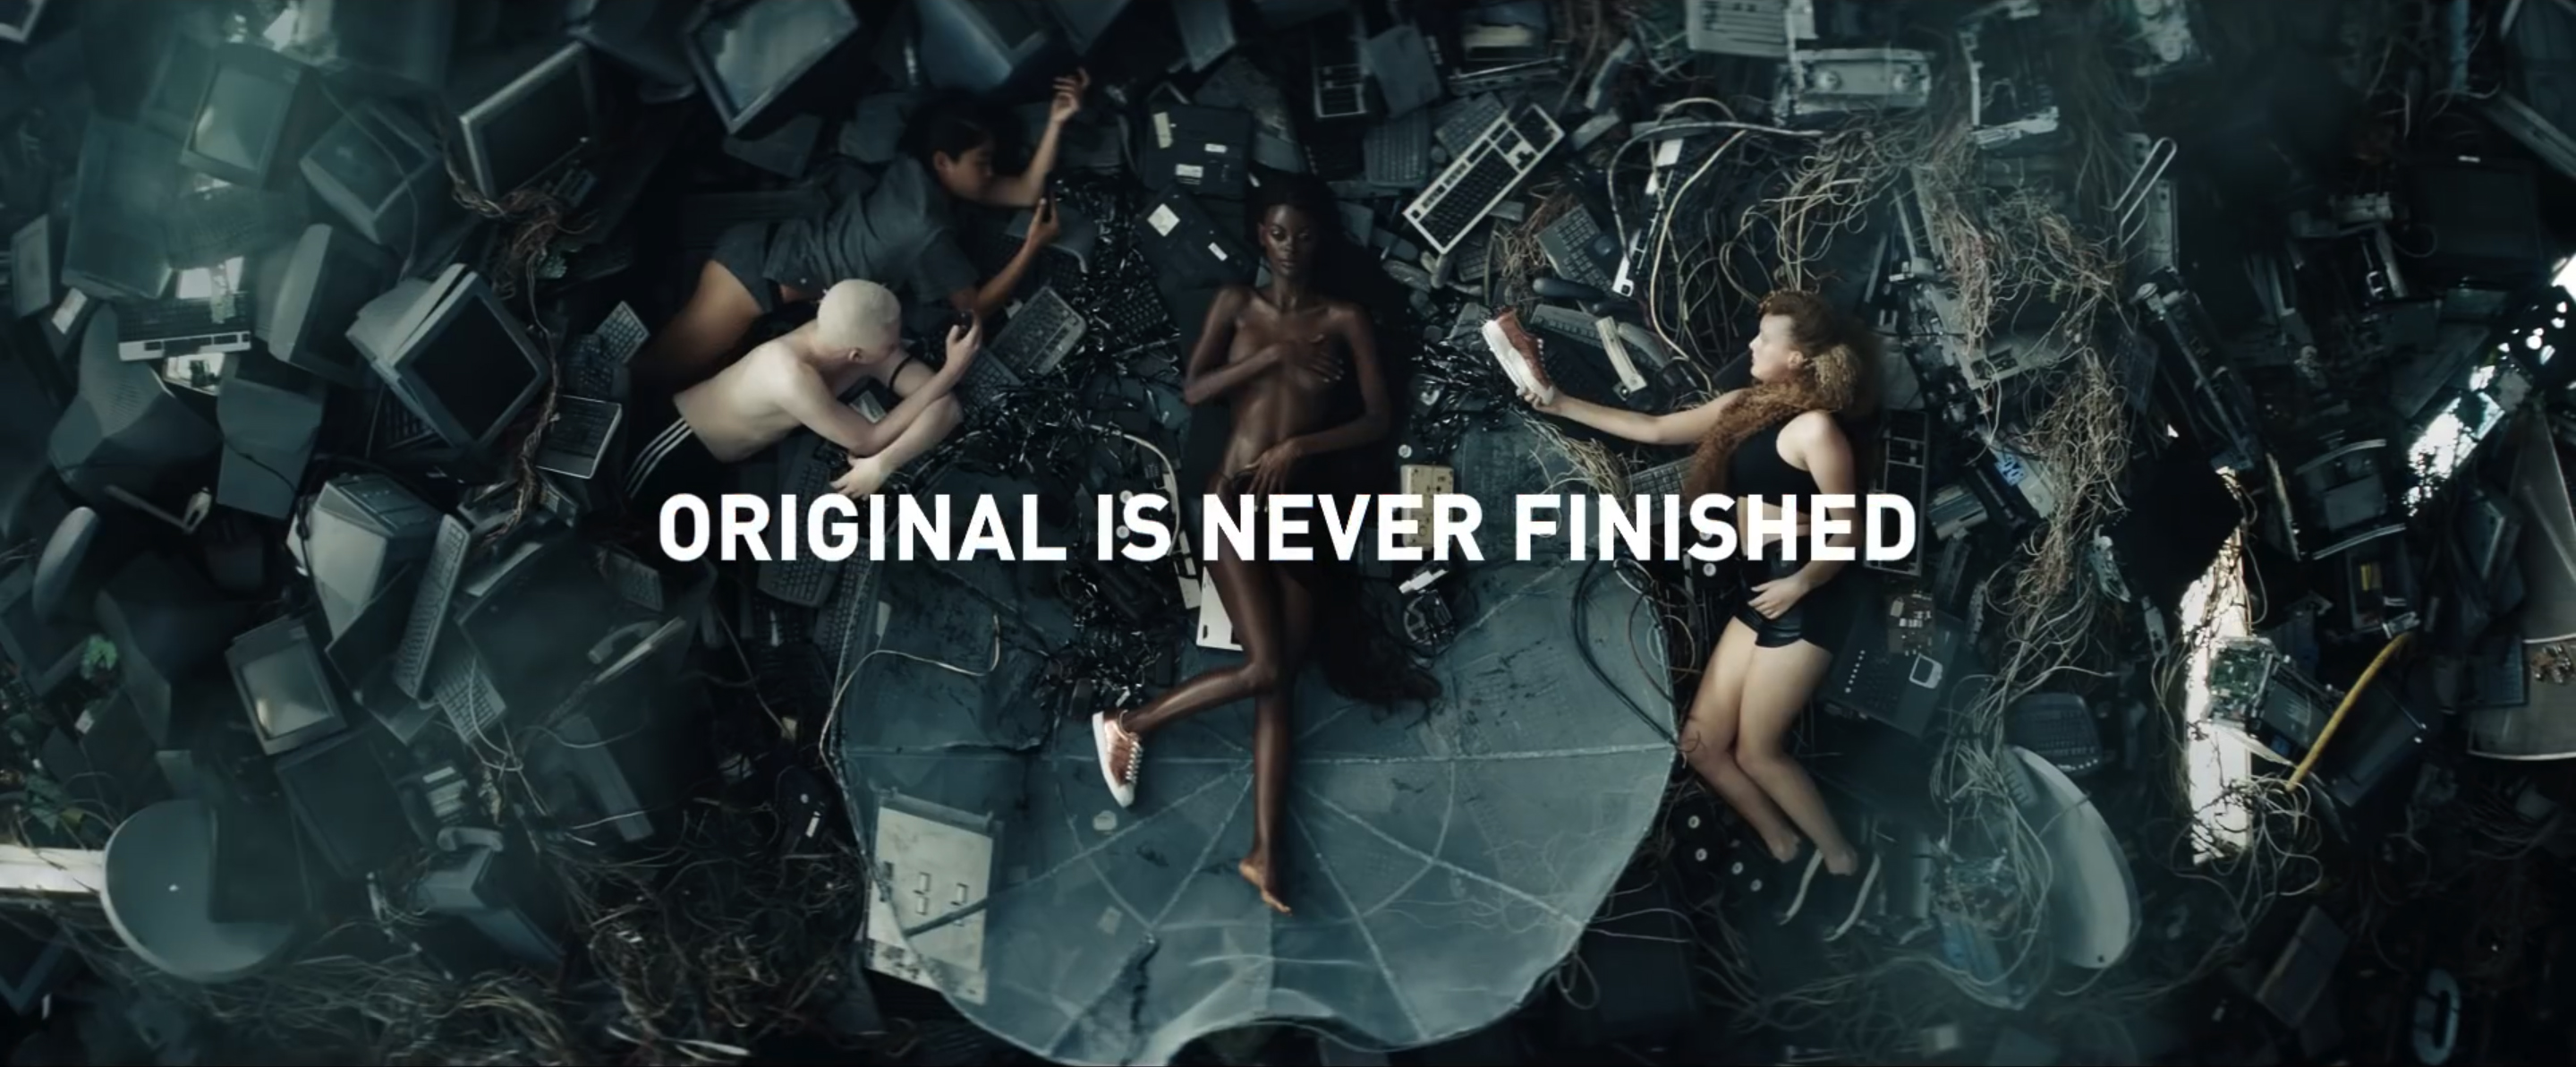 adidas original is never finished director